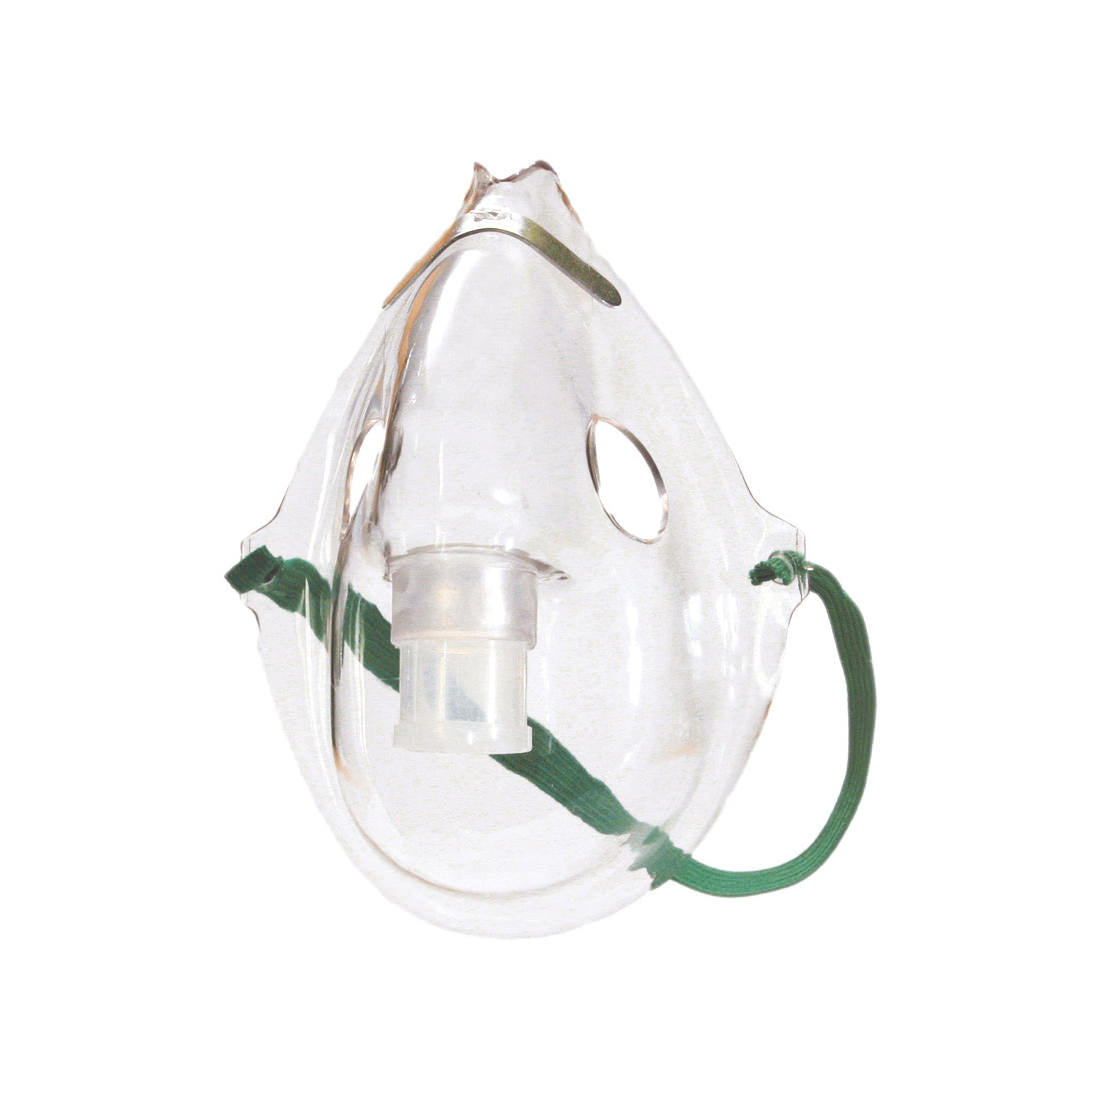 Pediatric or Adult Nebulizer Mask (Case of 50) - Just Nebulizers